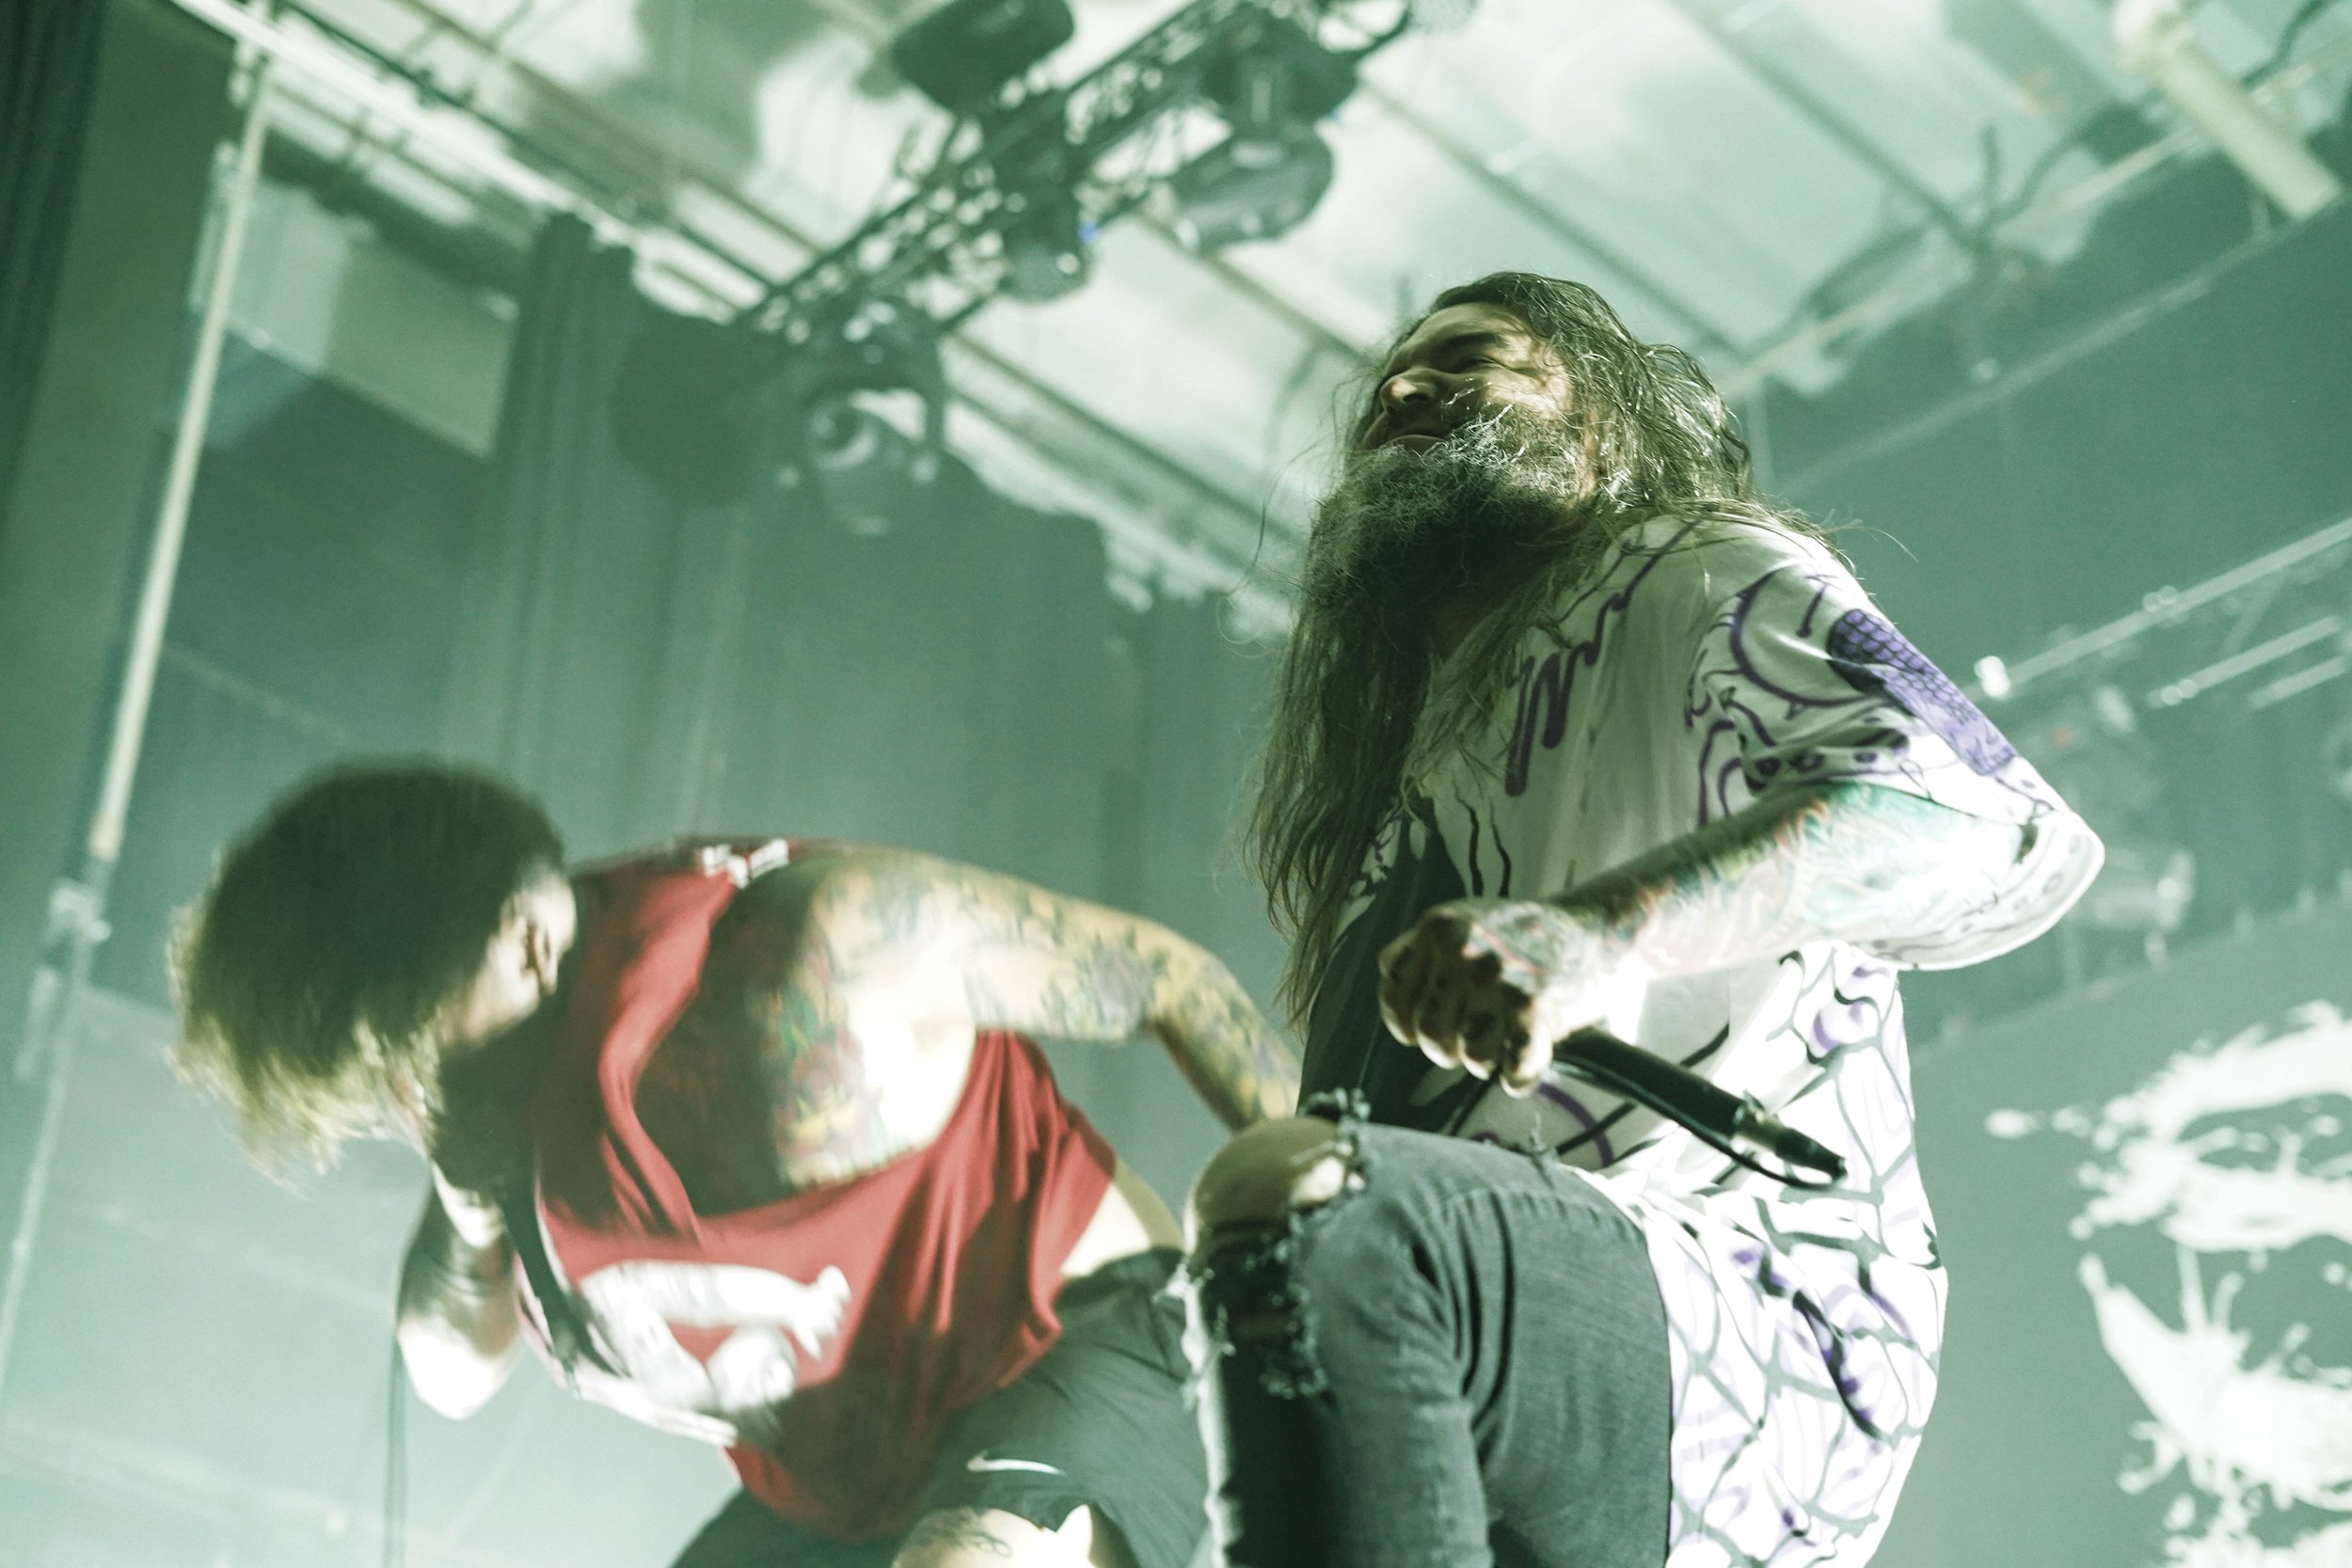 Suicide Silence at The Masquerade